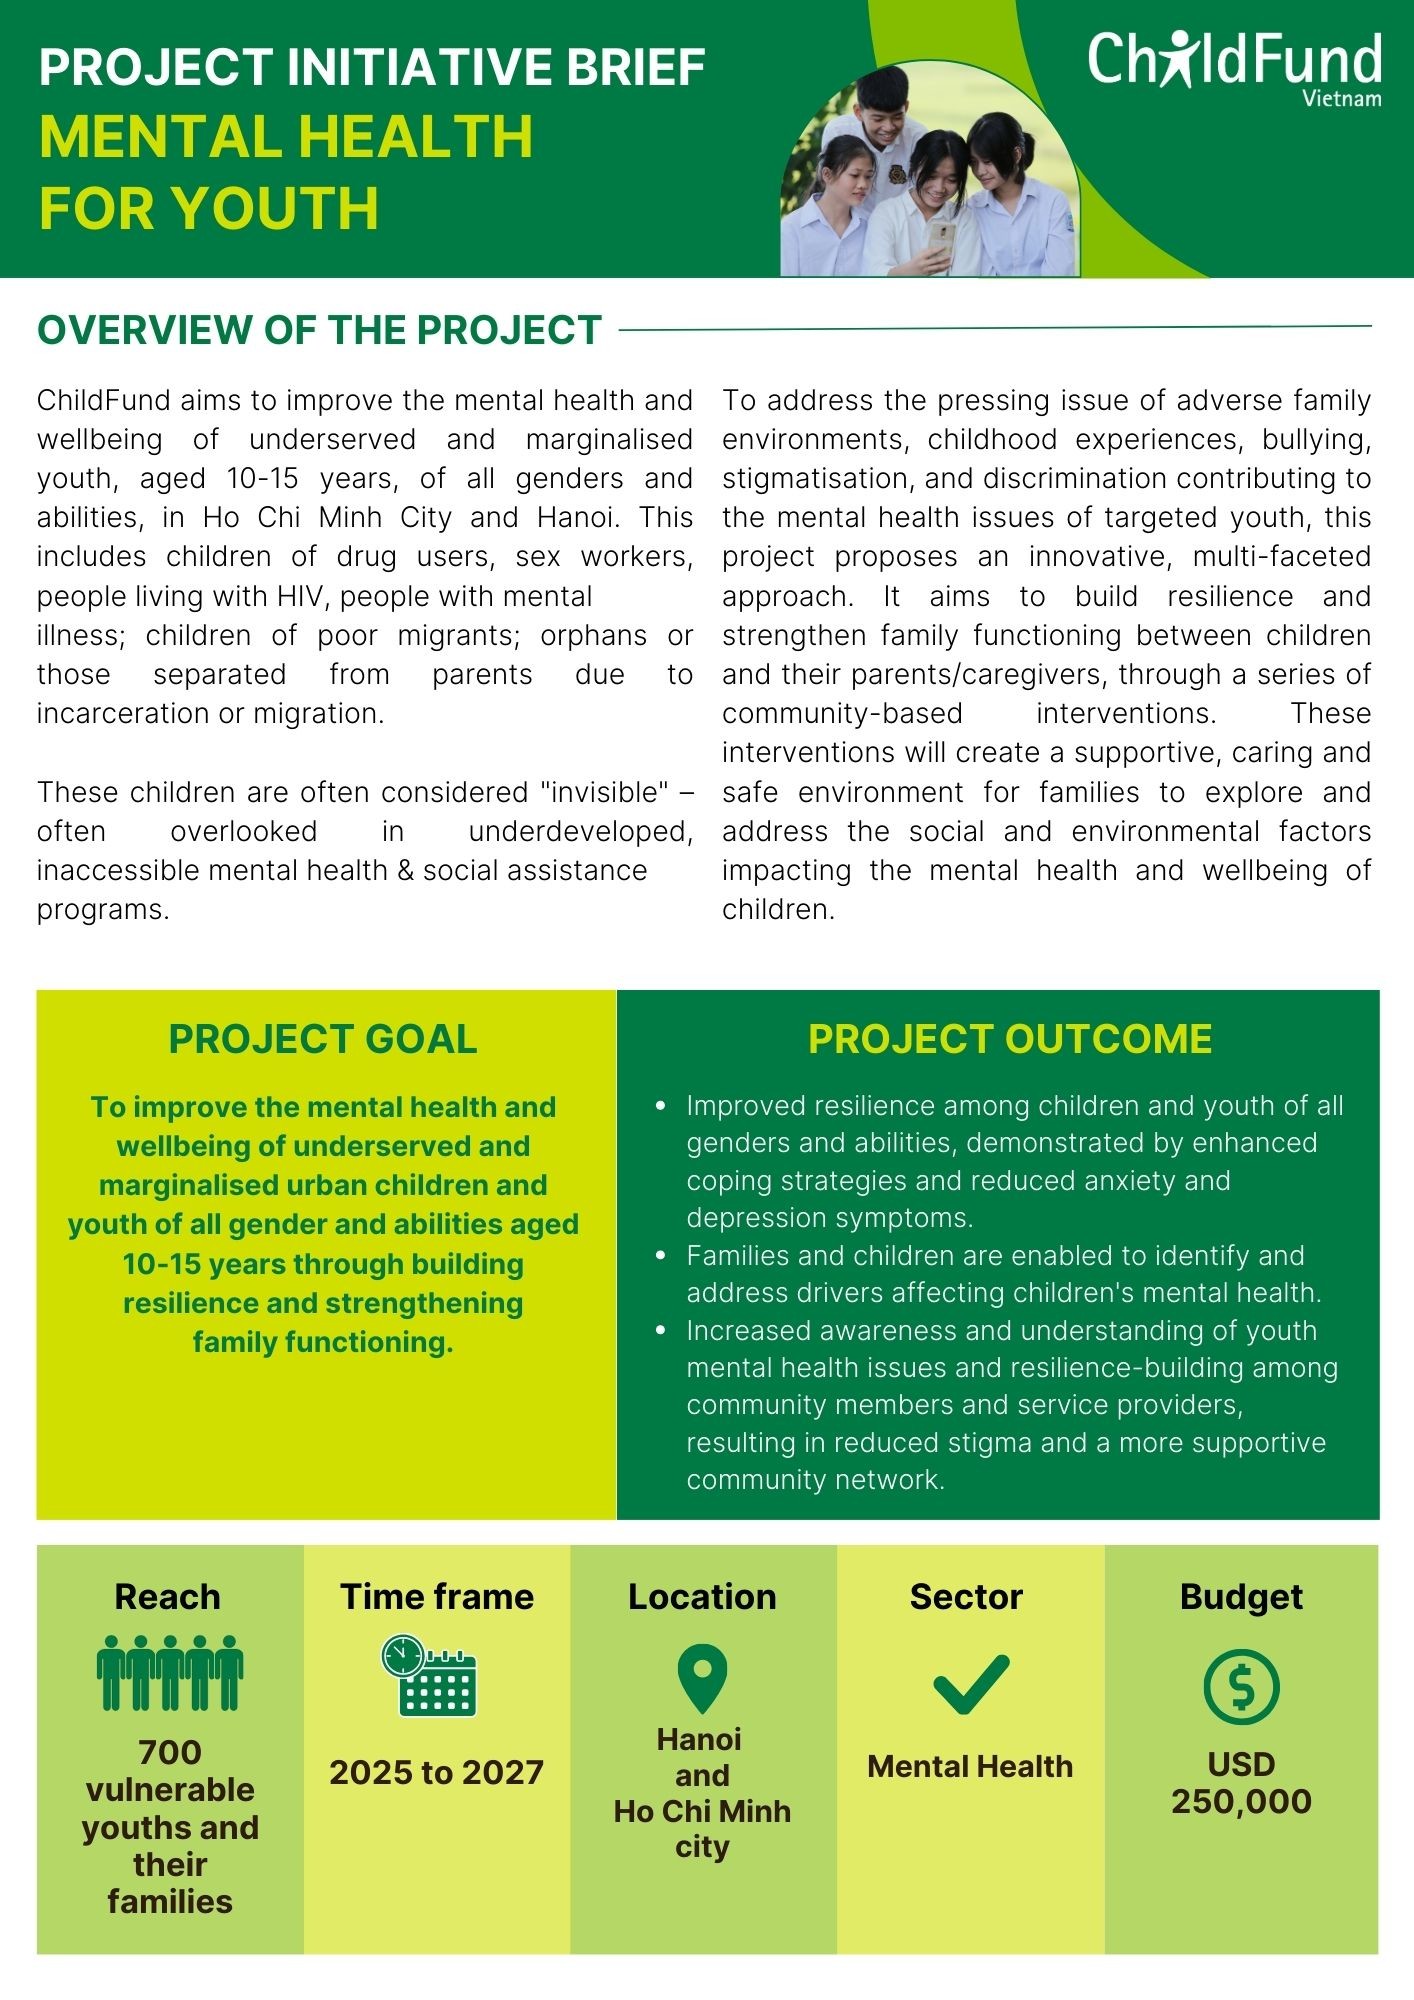 Project initiative brief “Mental health for youth”